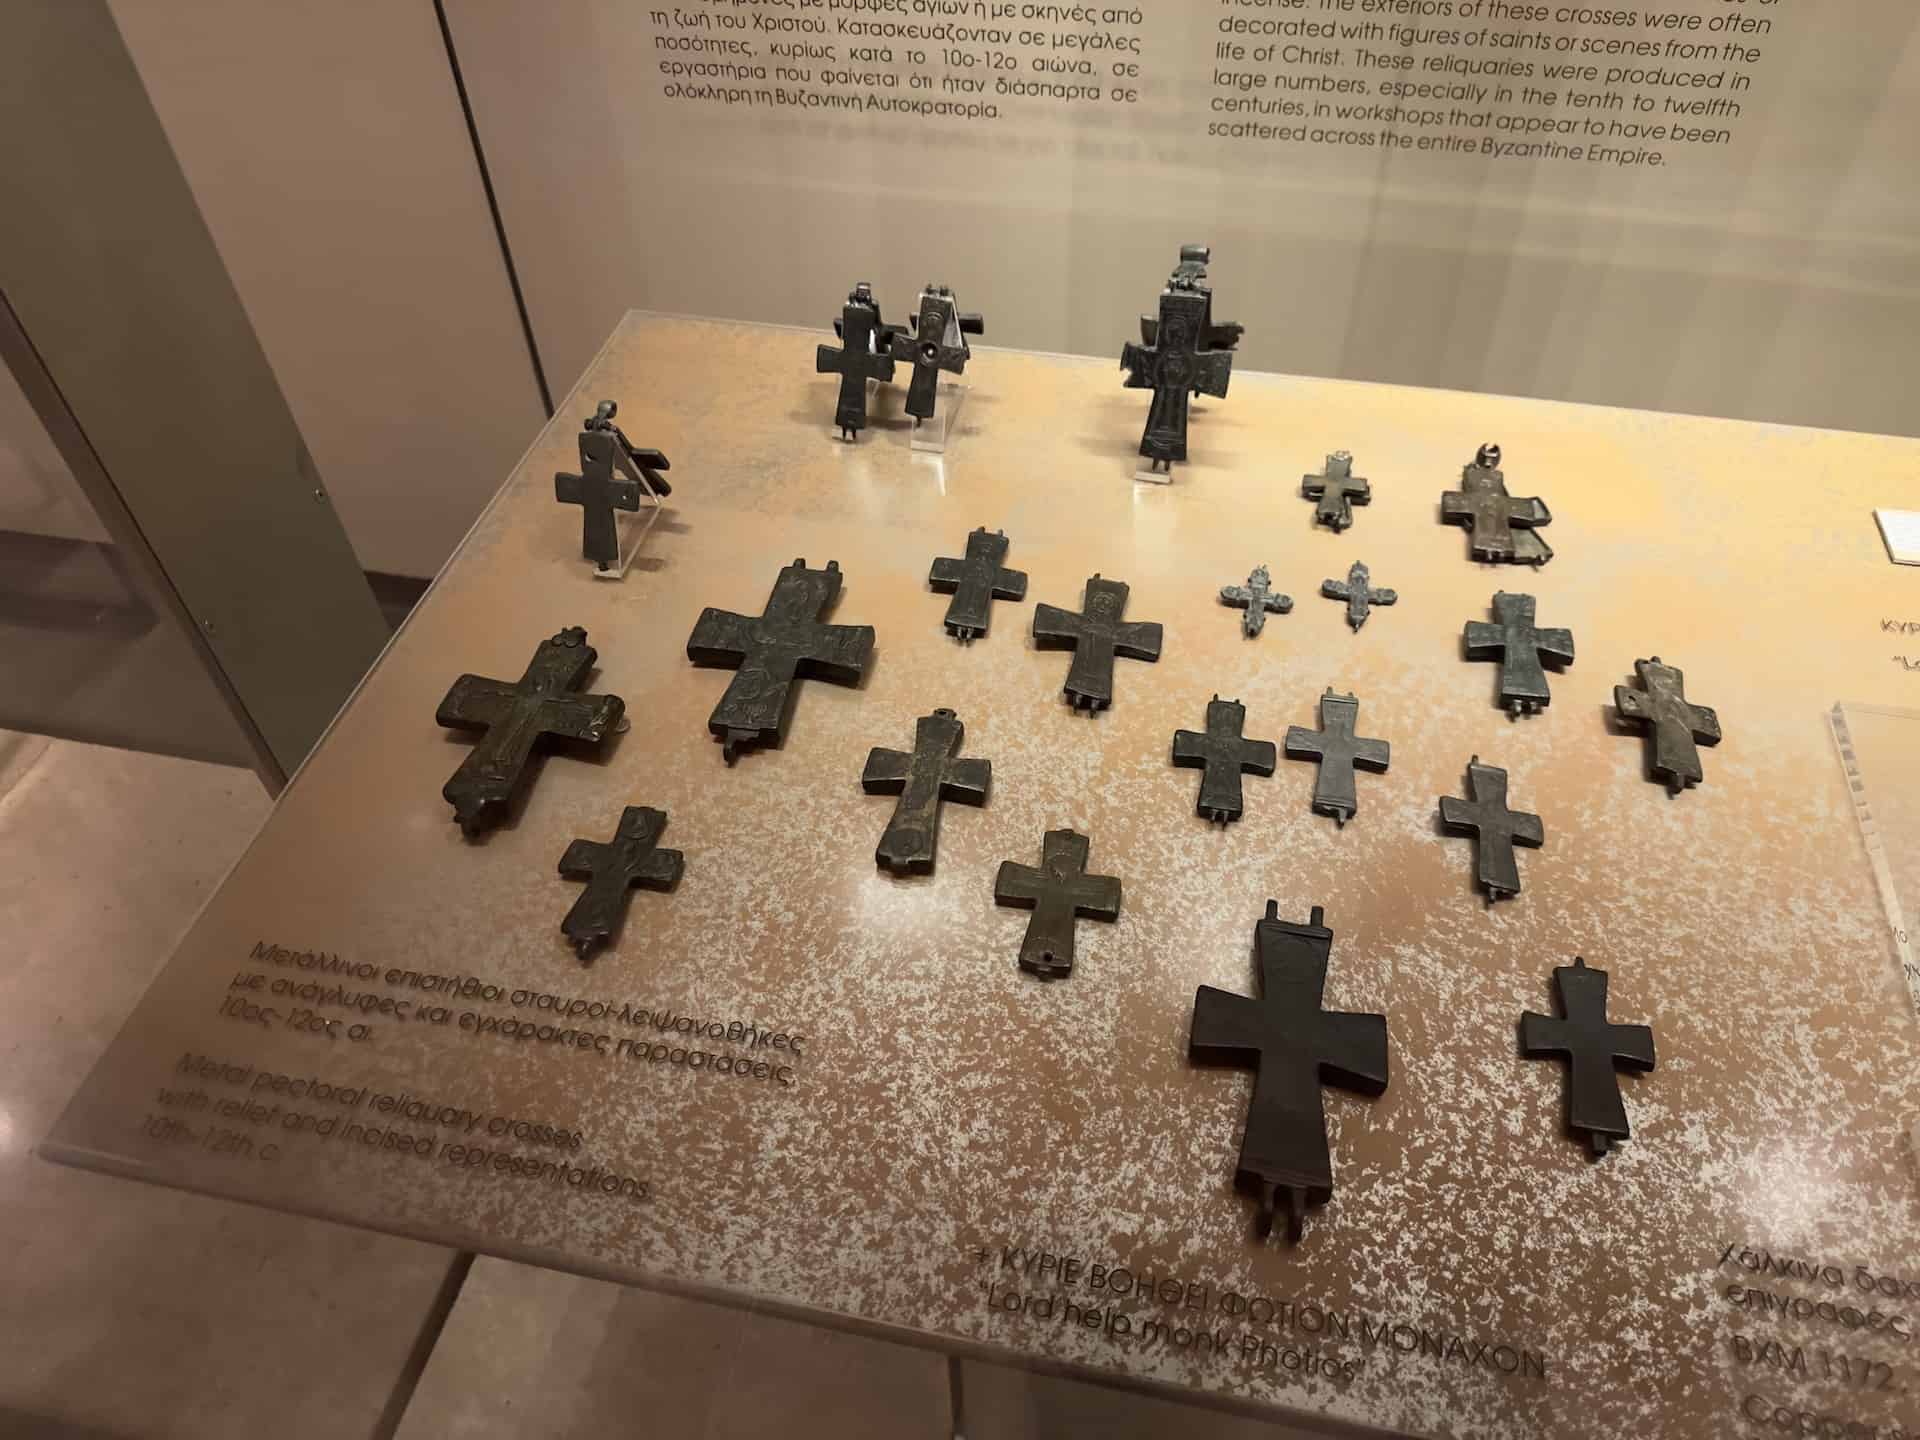 Metal pectoral reliquary crosses with relief and incised representations, 10th-12th century at the Byzantine Museum in Athens, Greece